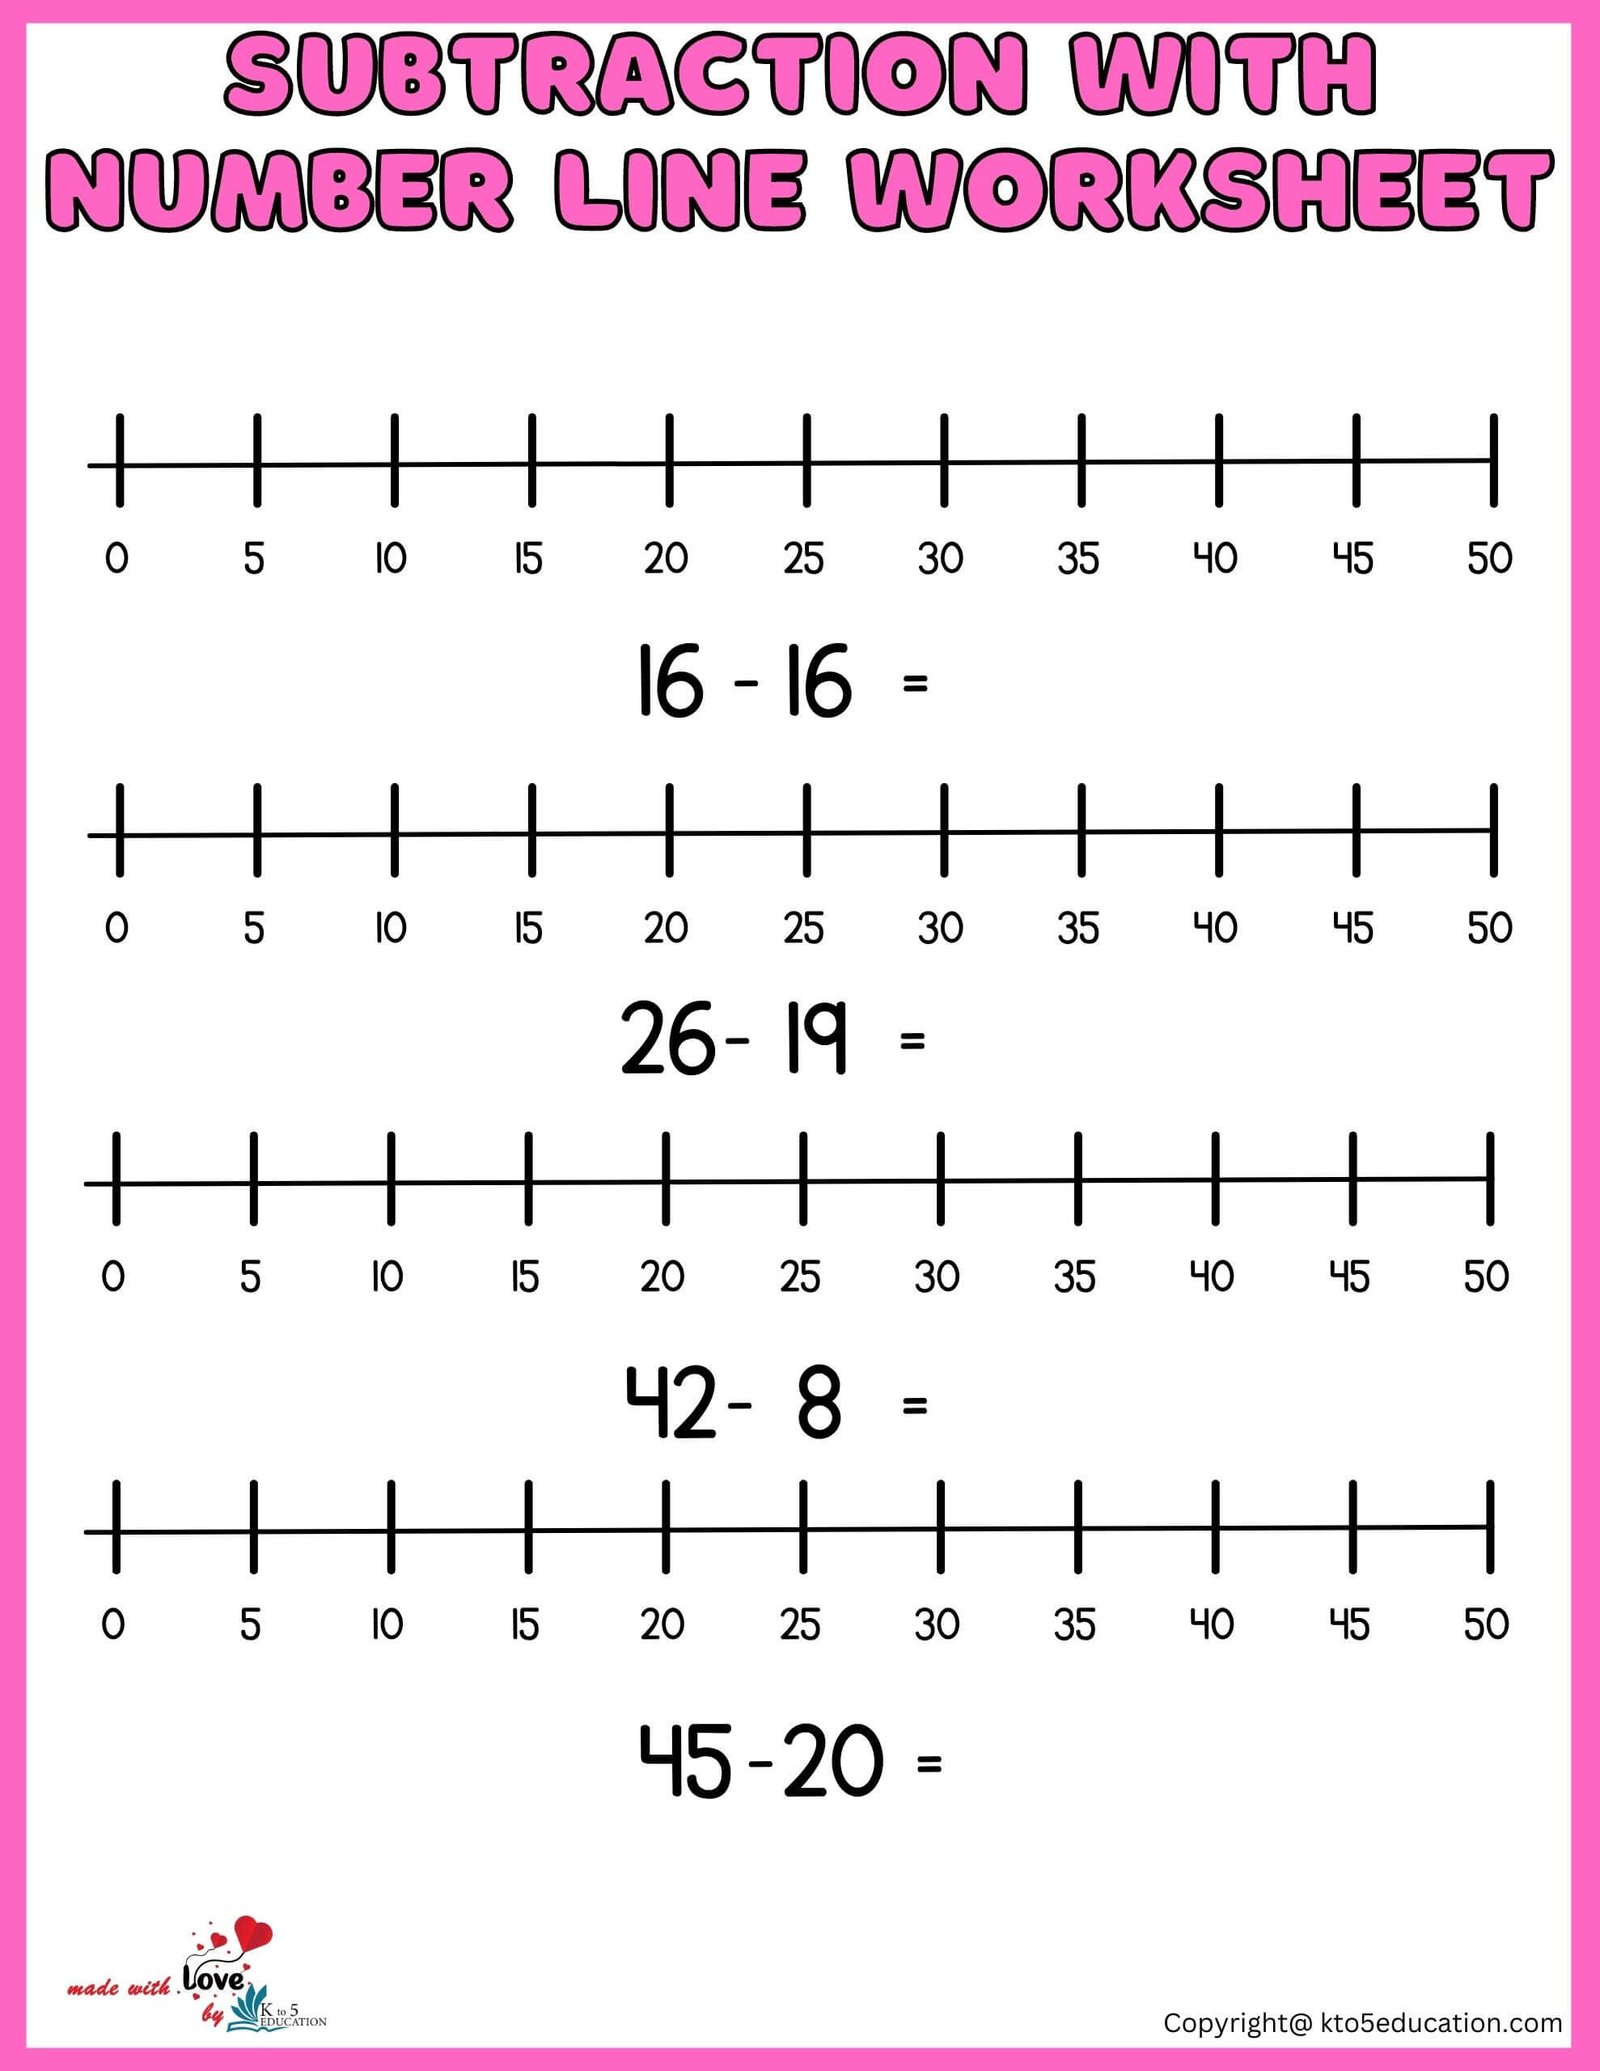 Subtraction With Number Line Worksheets 1-50